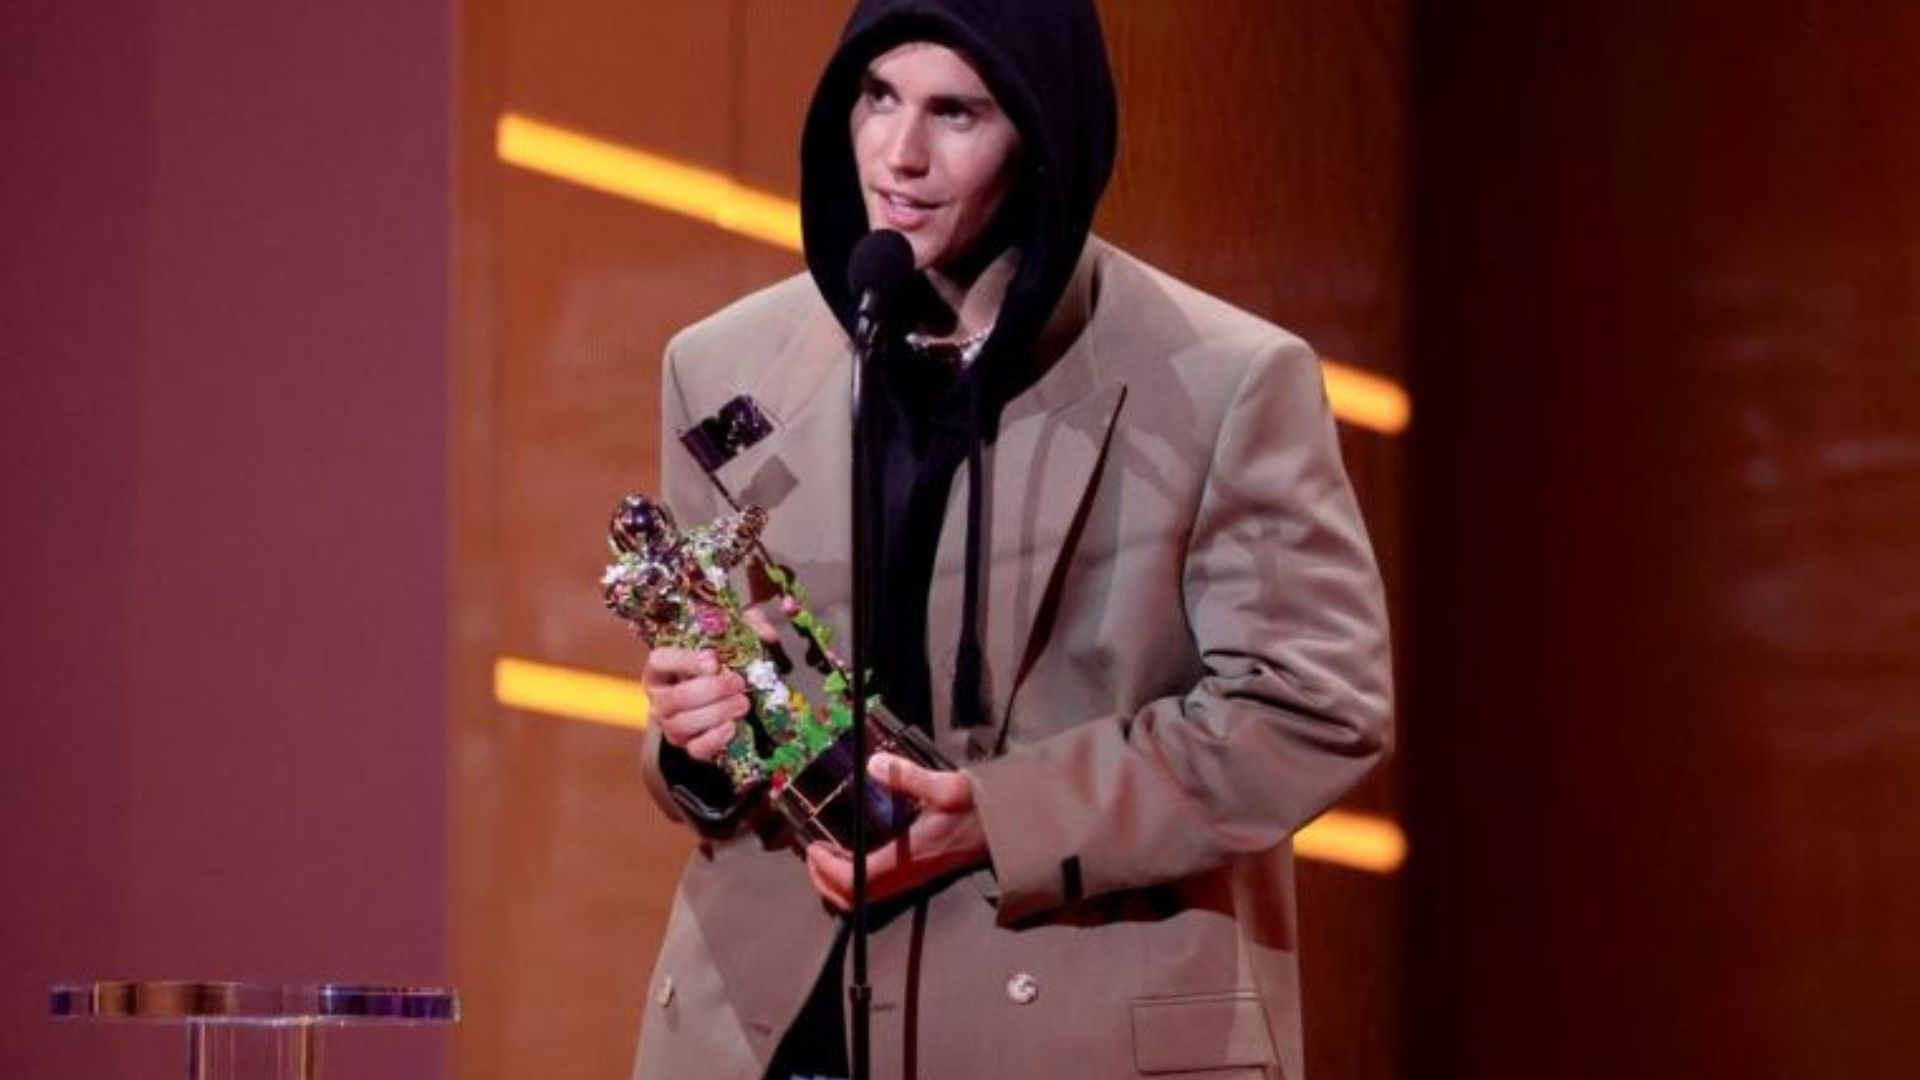 this image shows one of the best male musicians, Justin Bieber at the Music Awards